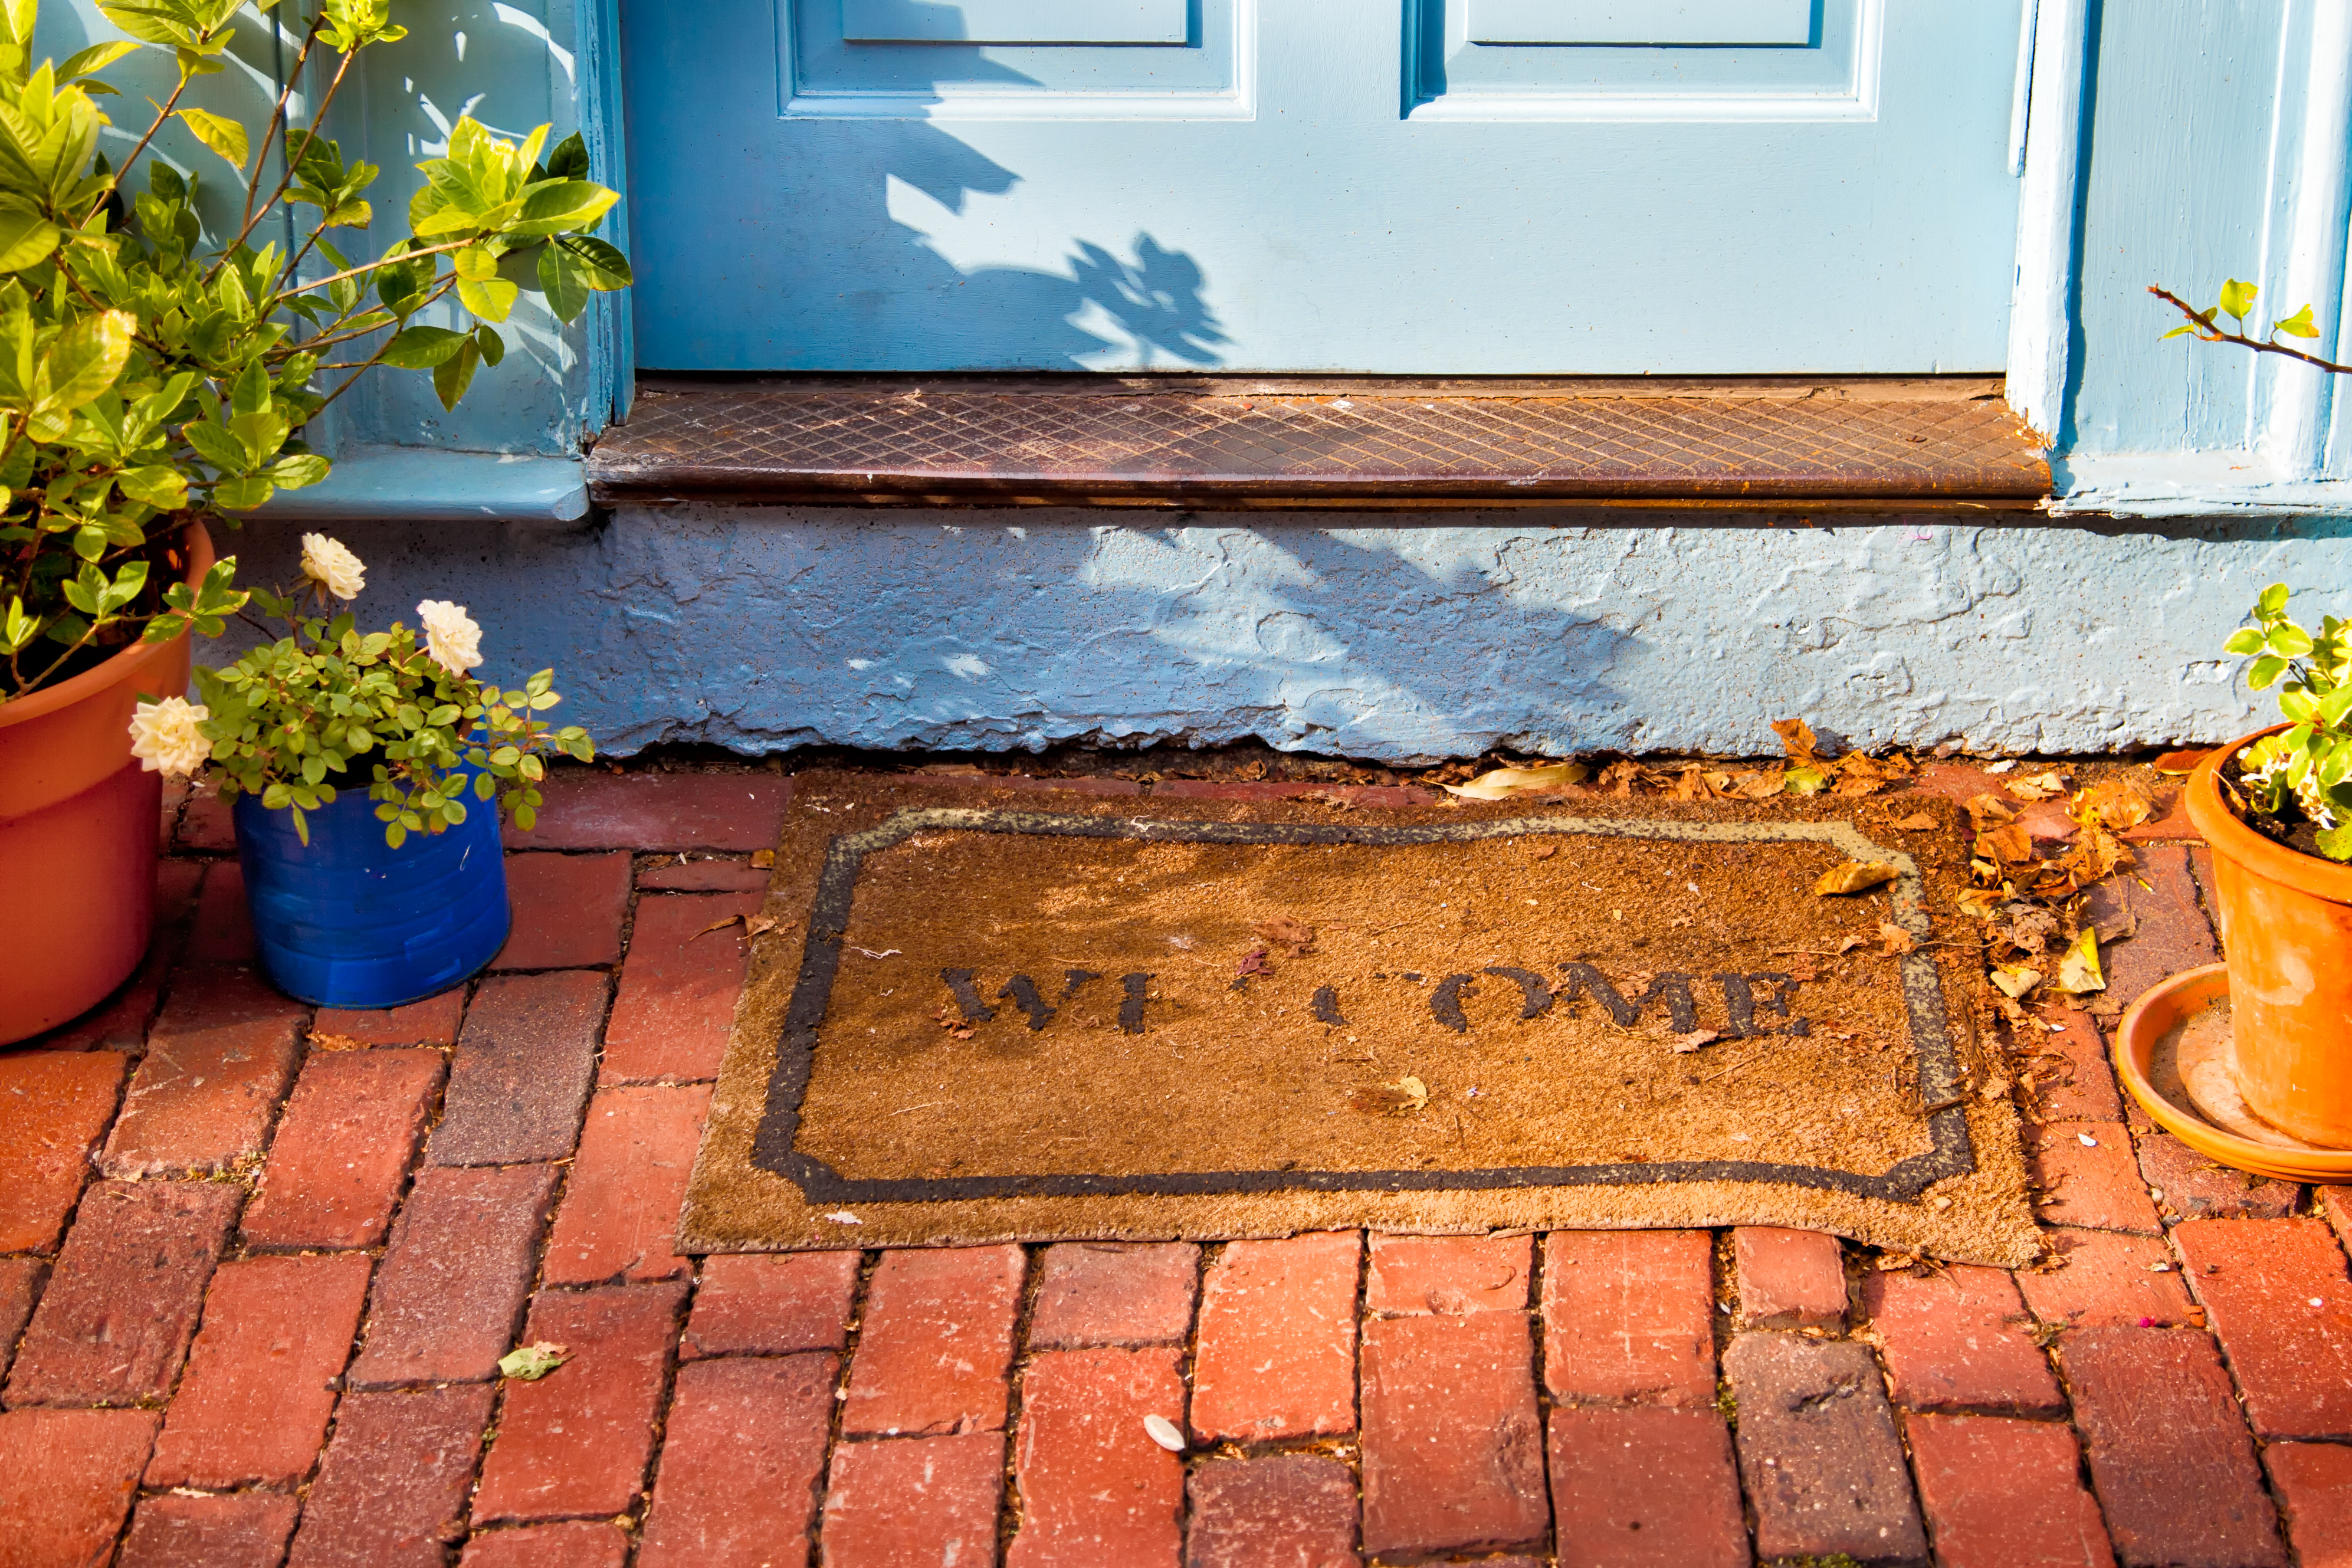 A welcome mat at the outside foot of a door on a brick path.